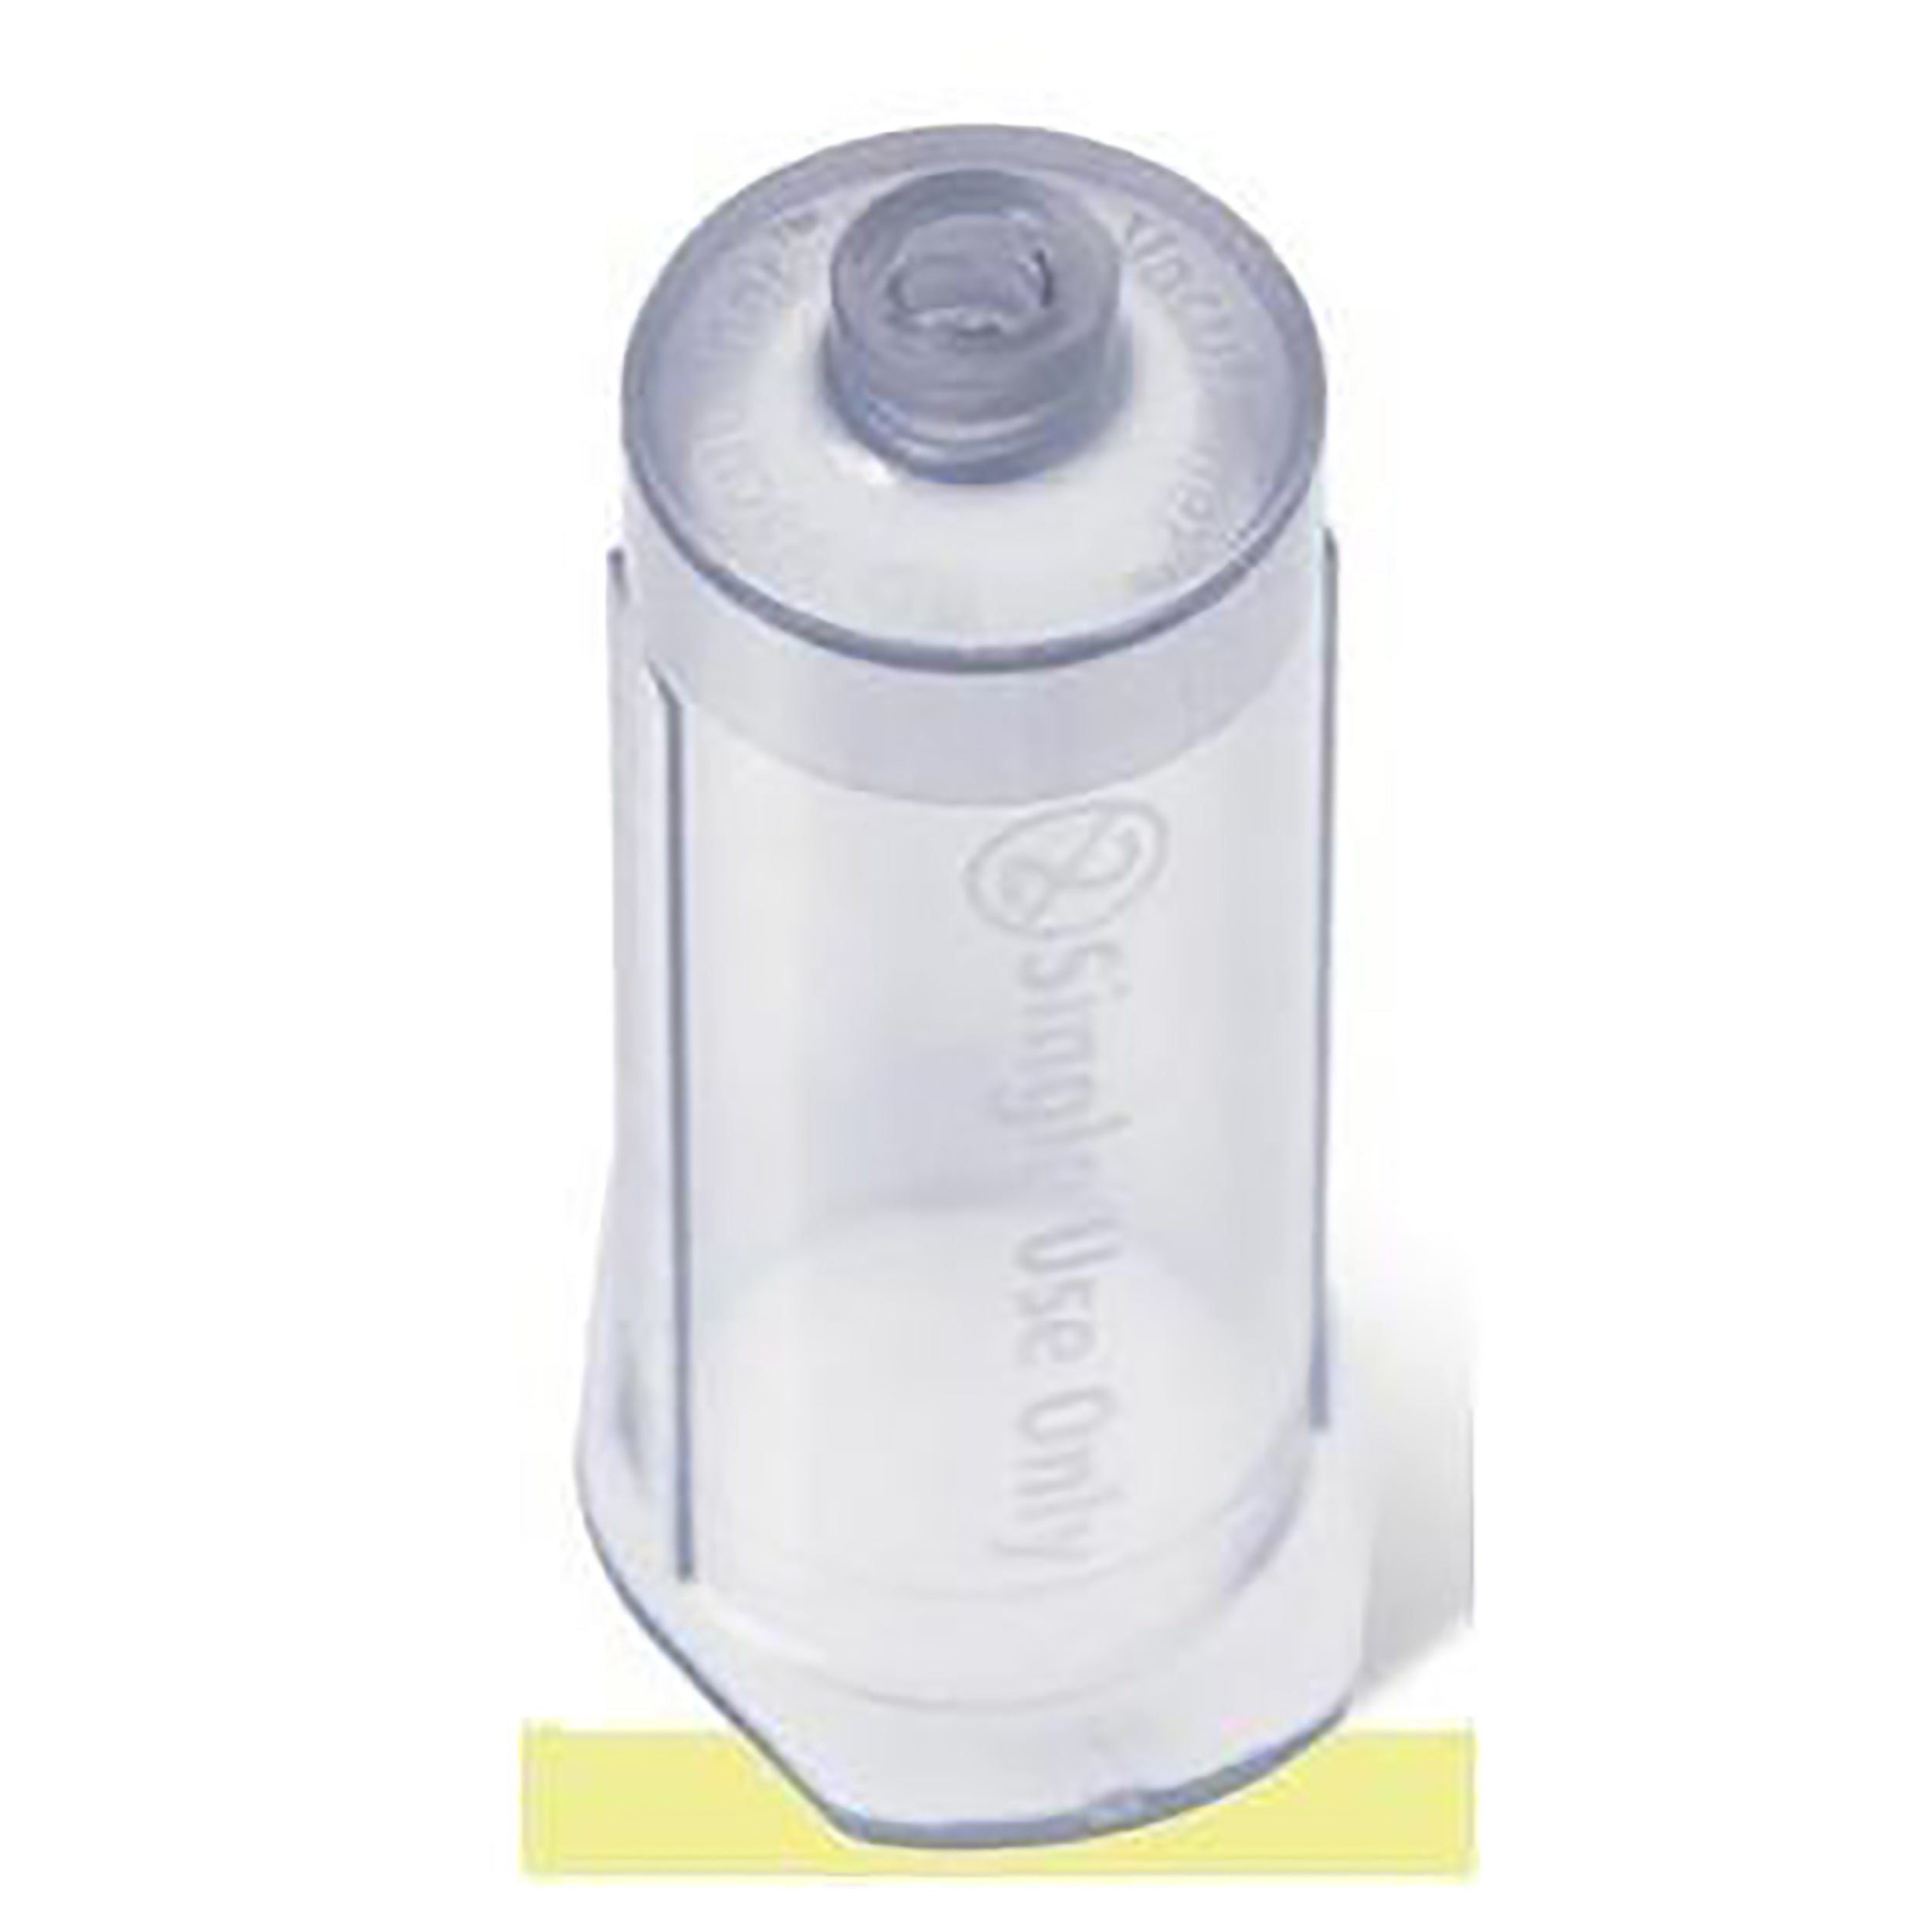 BD Vacutainer One-Use Holder